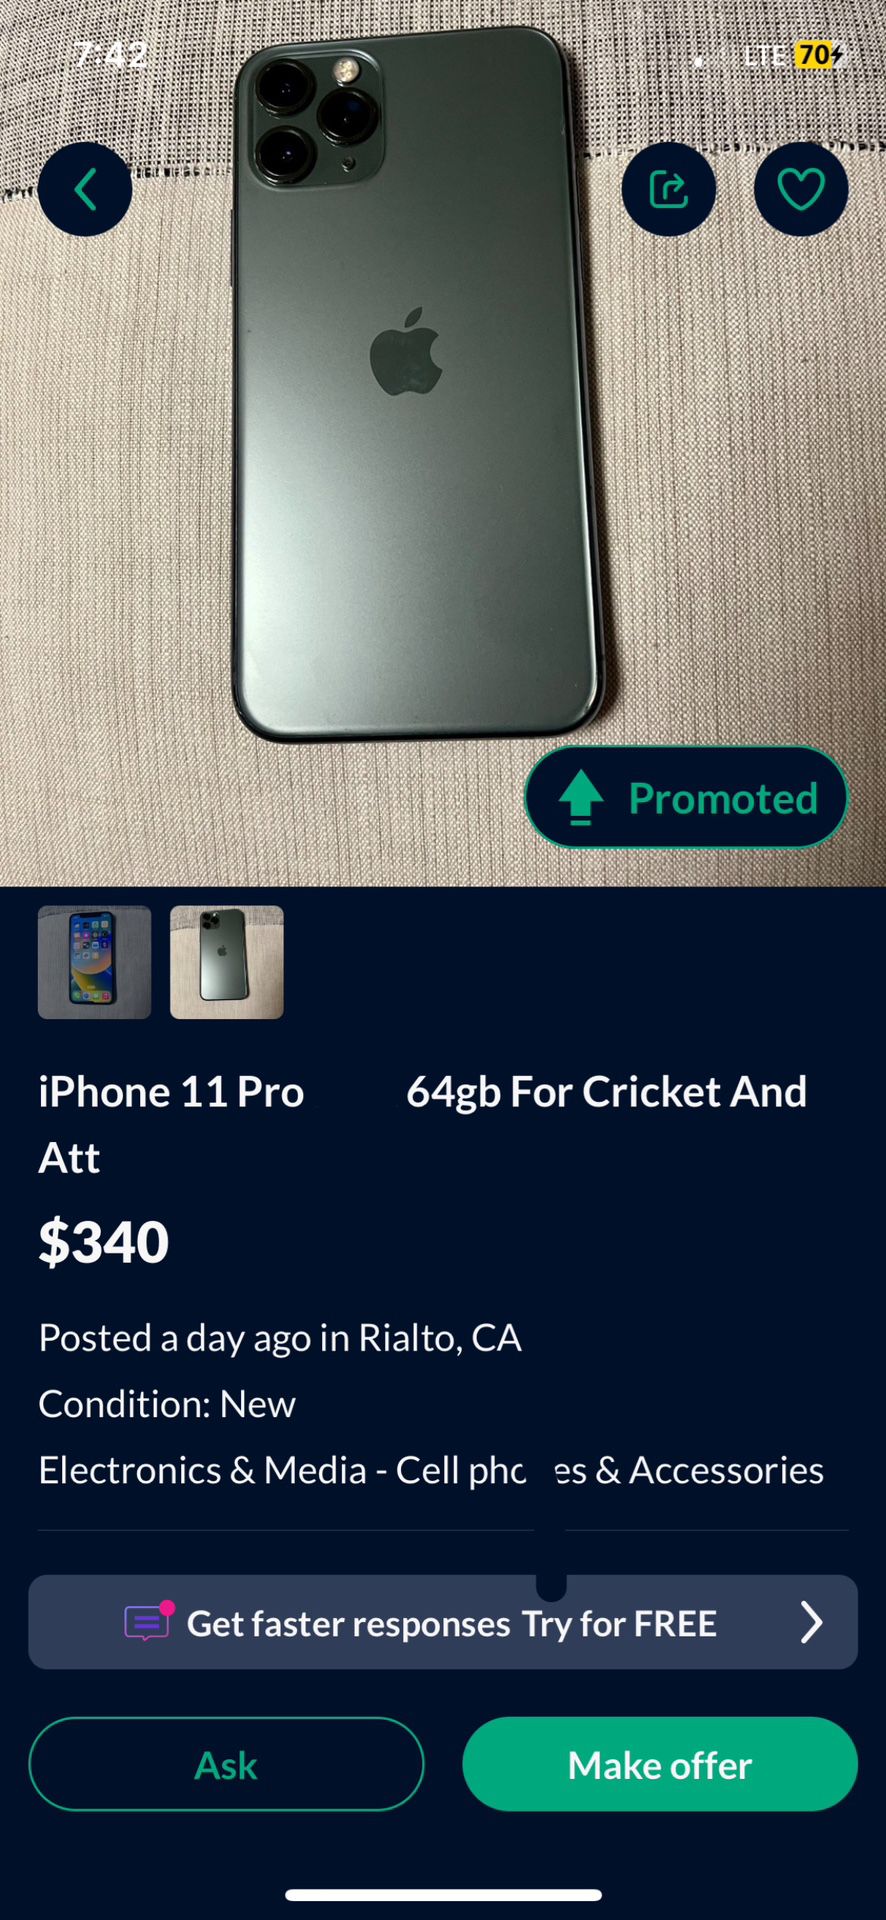 iPhone 11 Pro For Cricket And Att